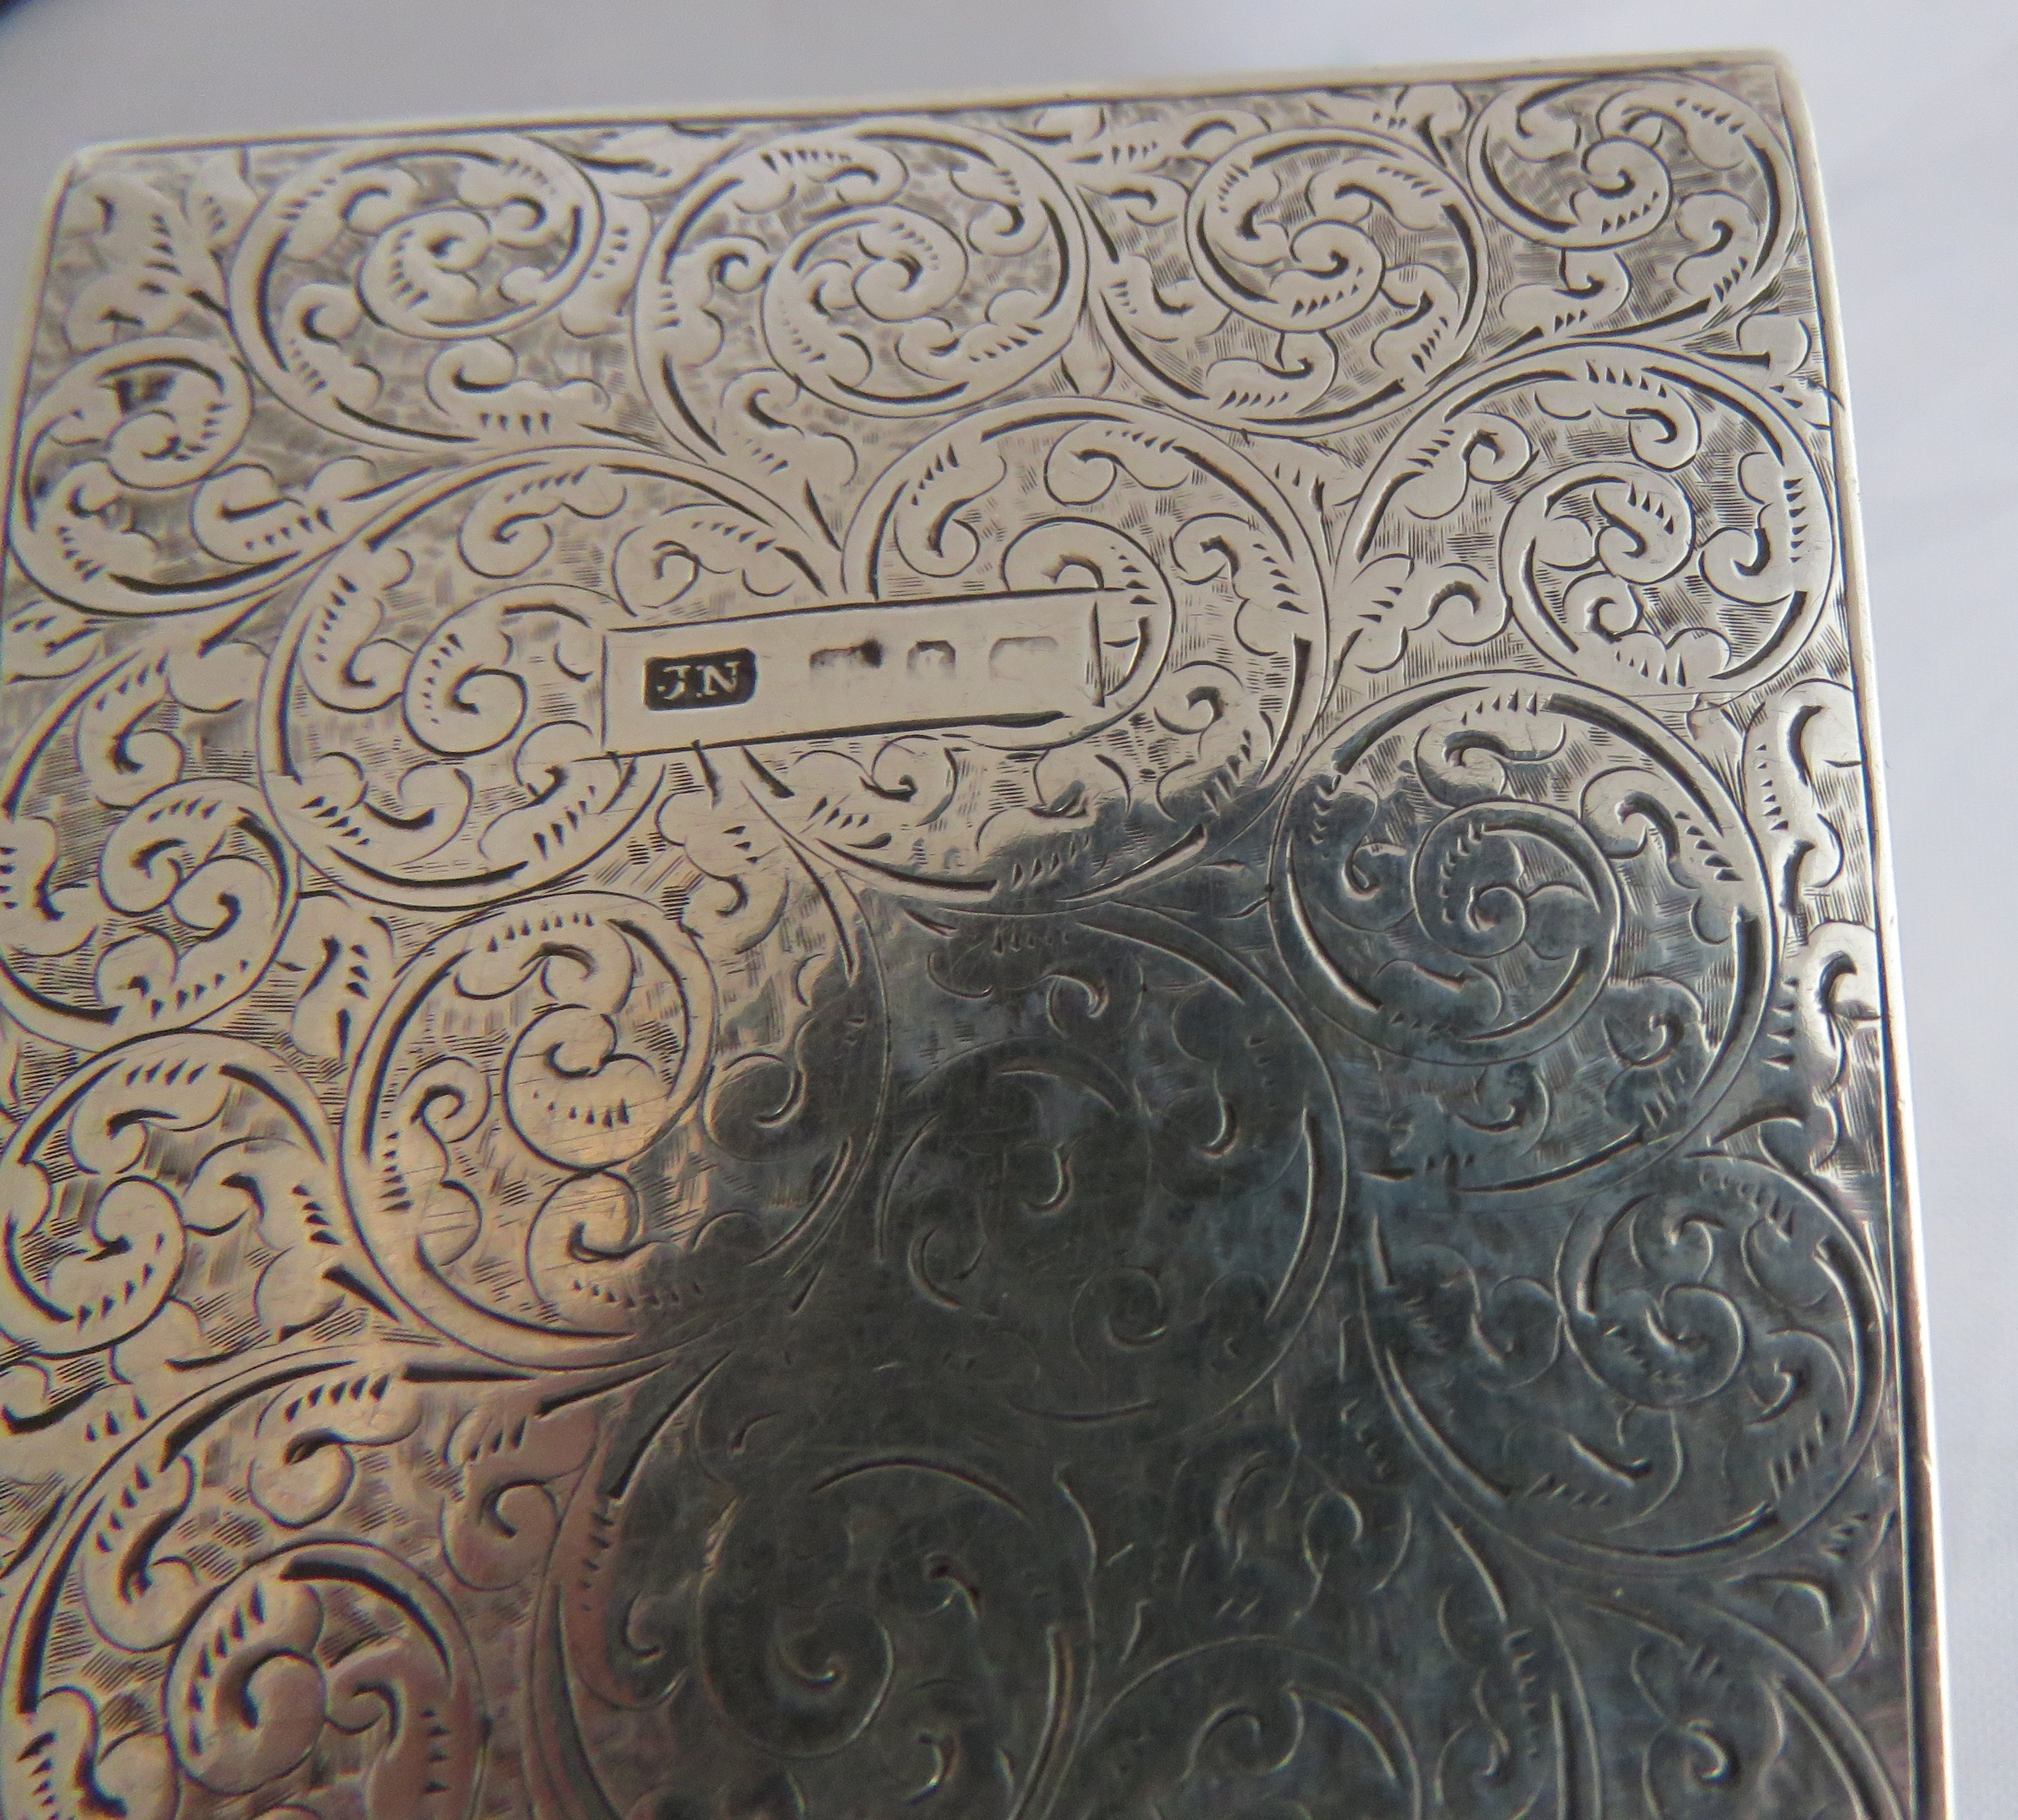 A lovely silver C19th engraved pattern scissor case containing 2 pairs of scissors (not silver). - Image 7 of 7